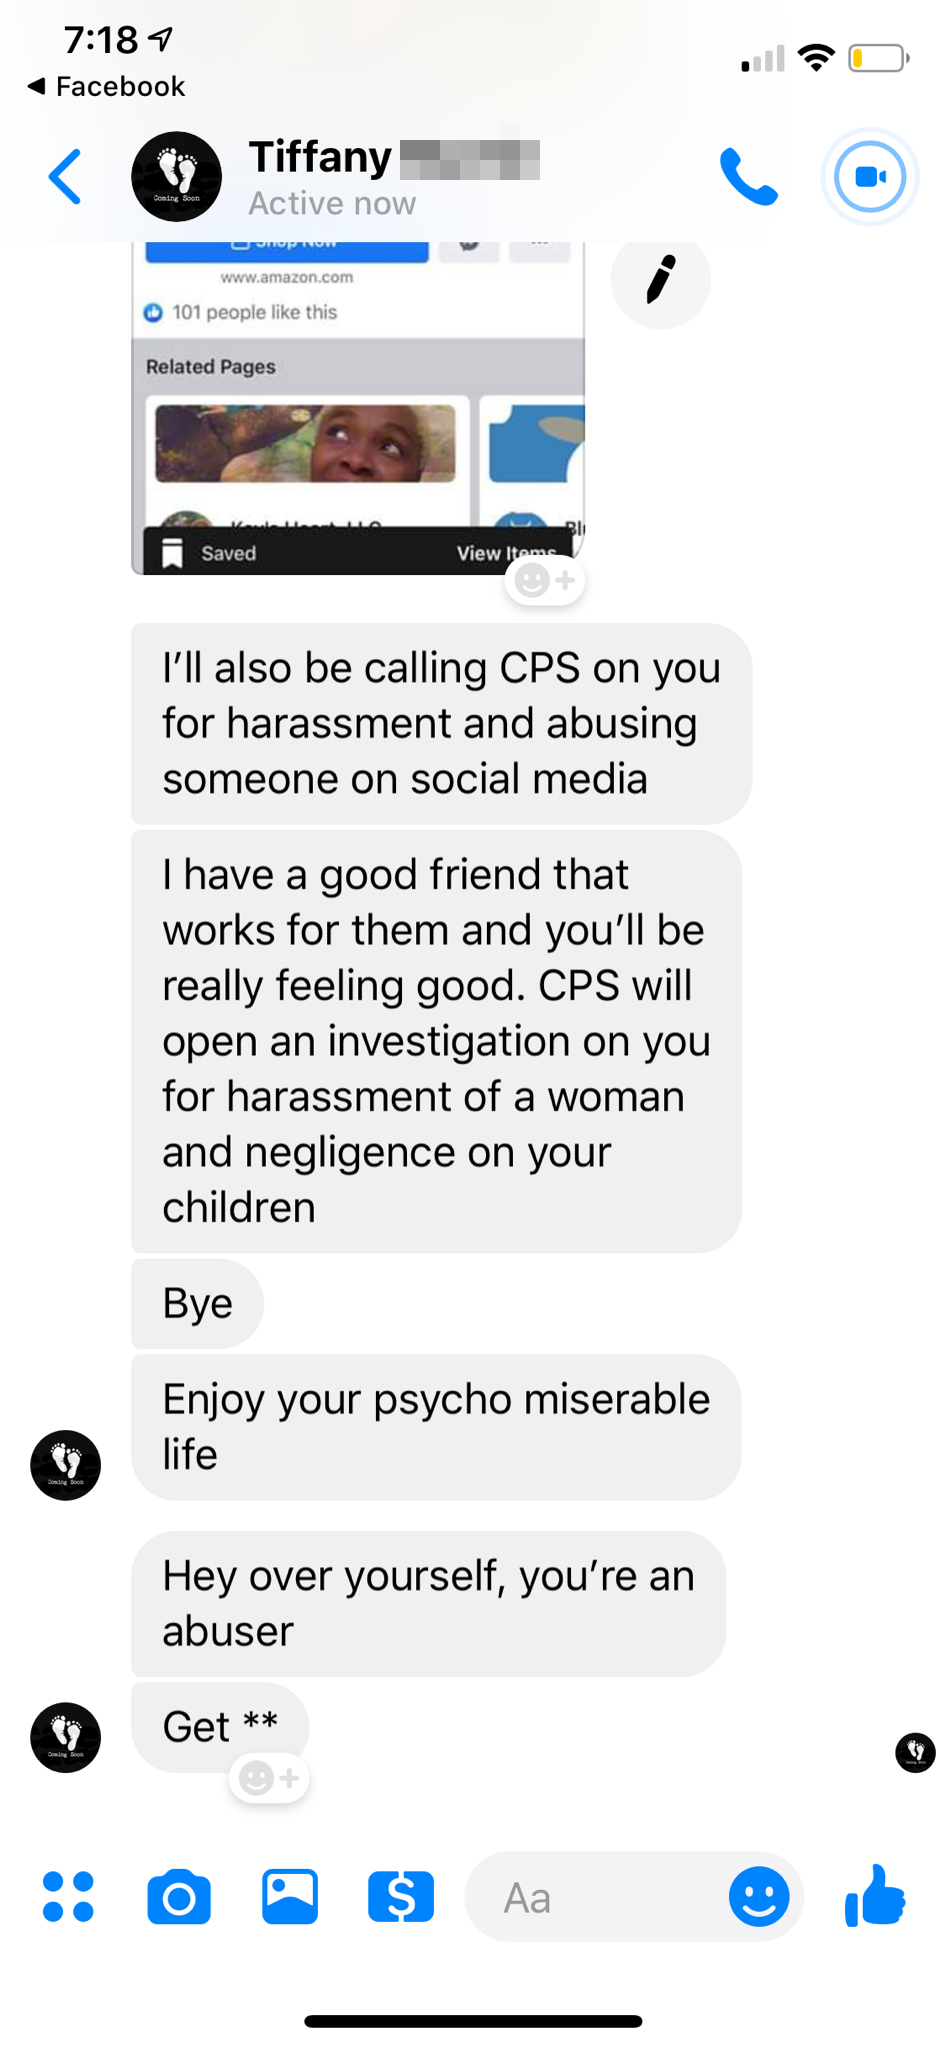 web page - 7 Facebook Tiffany I'll also be calling Cps on you for harassment and abusing someone on social media I have a good friend that works for them and you'll be really feeling good. Cps will open an investigation on you for harassment of a woman an